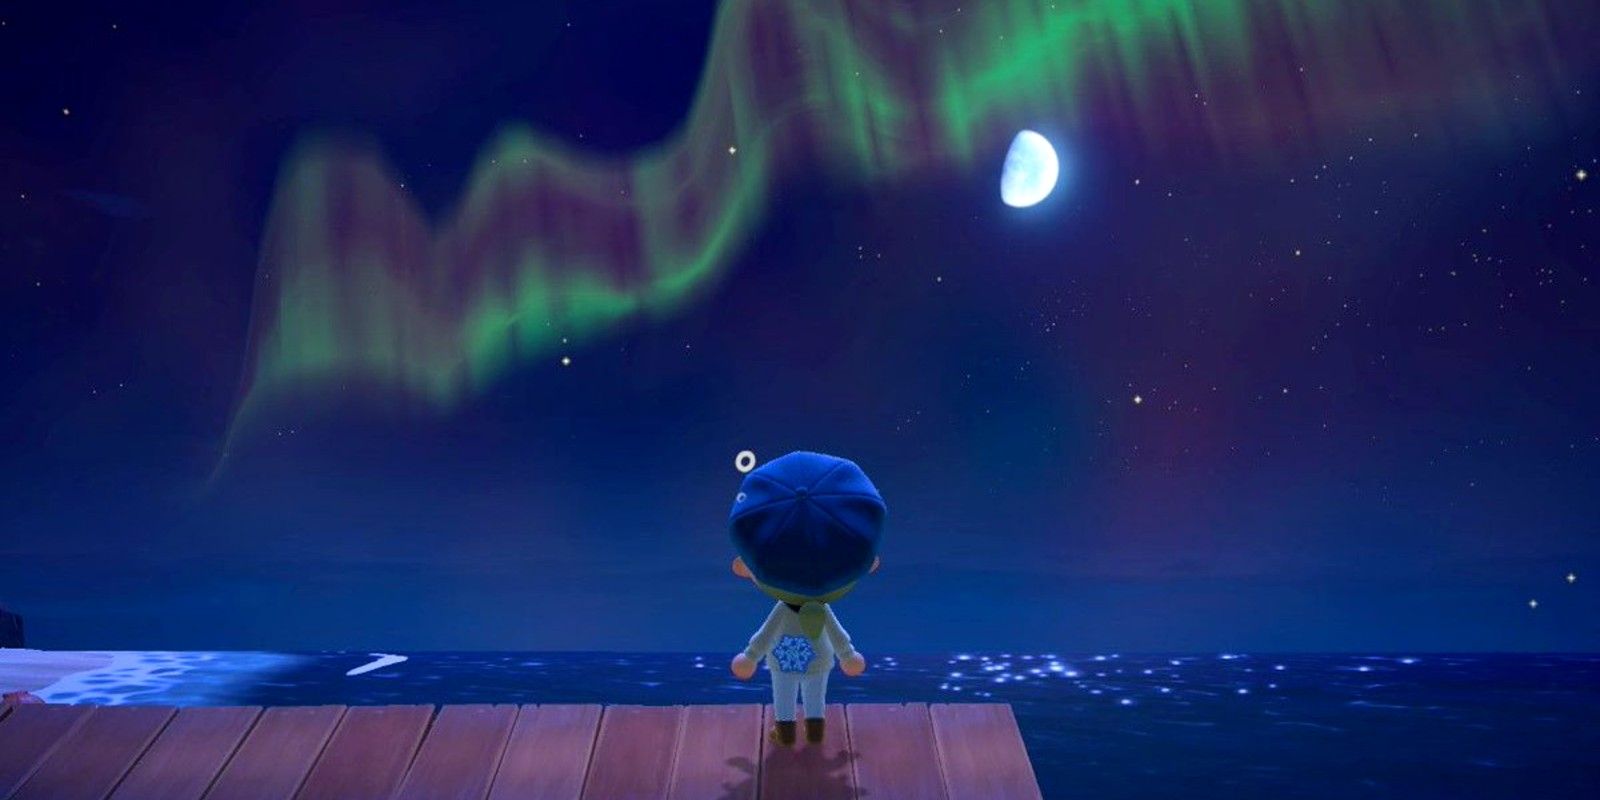 A player watches an aurora over the pier during winter in Animal Crossing: New Horizons